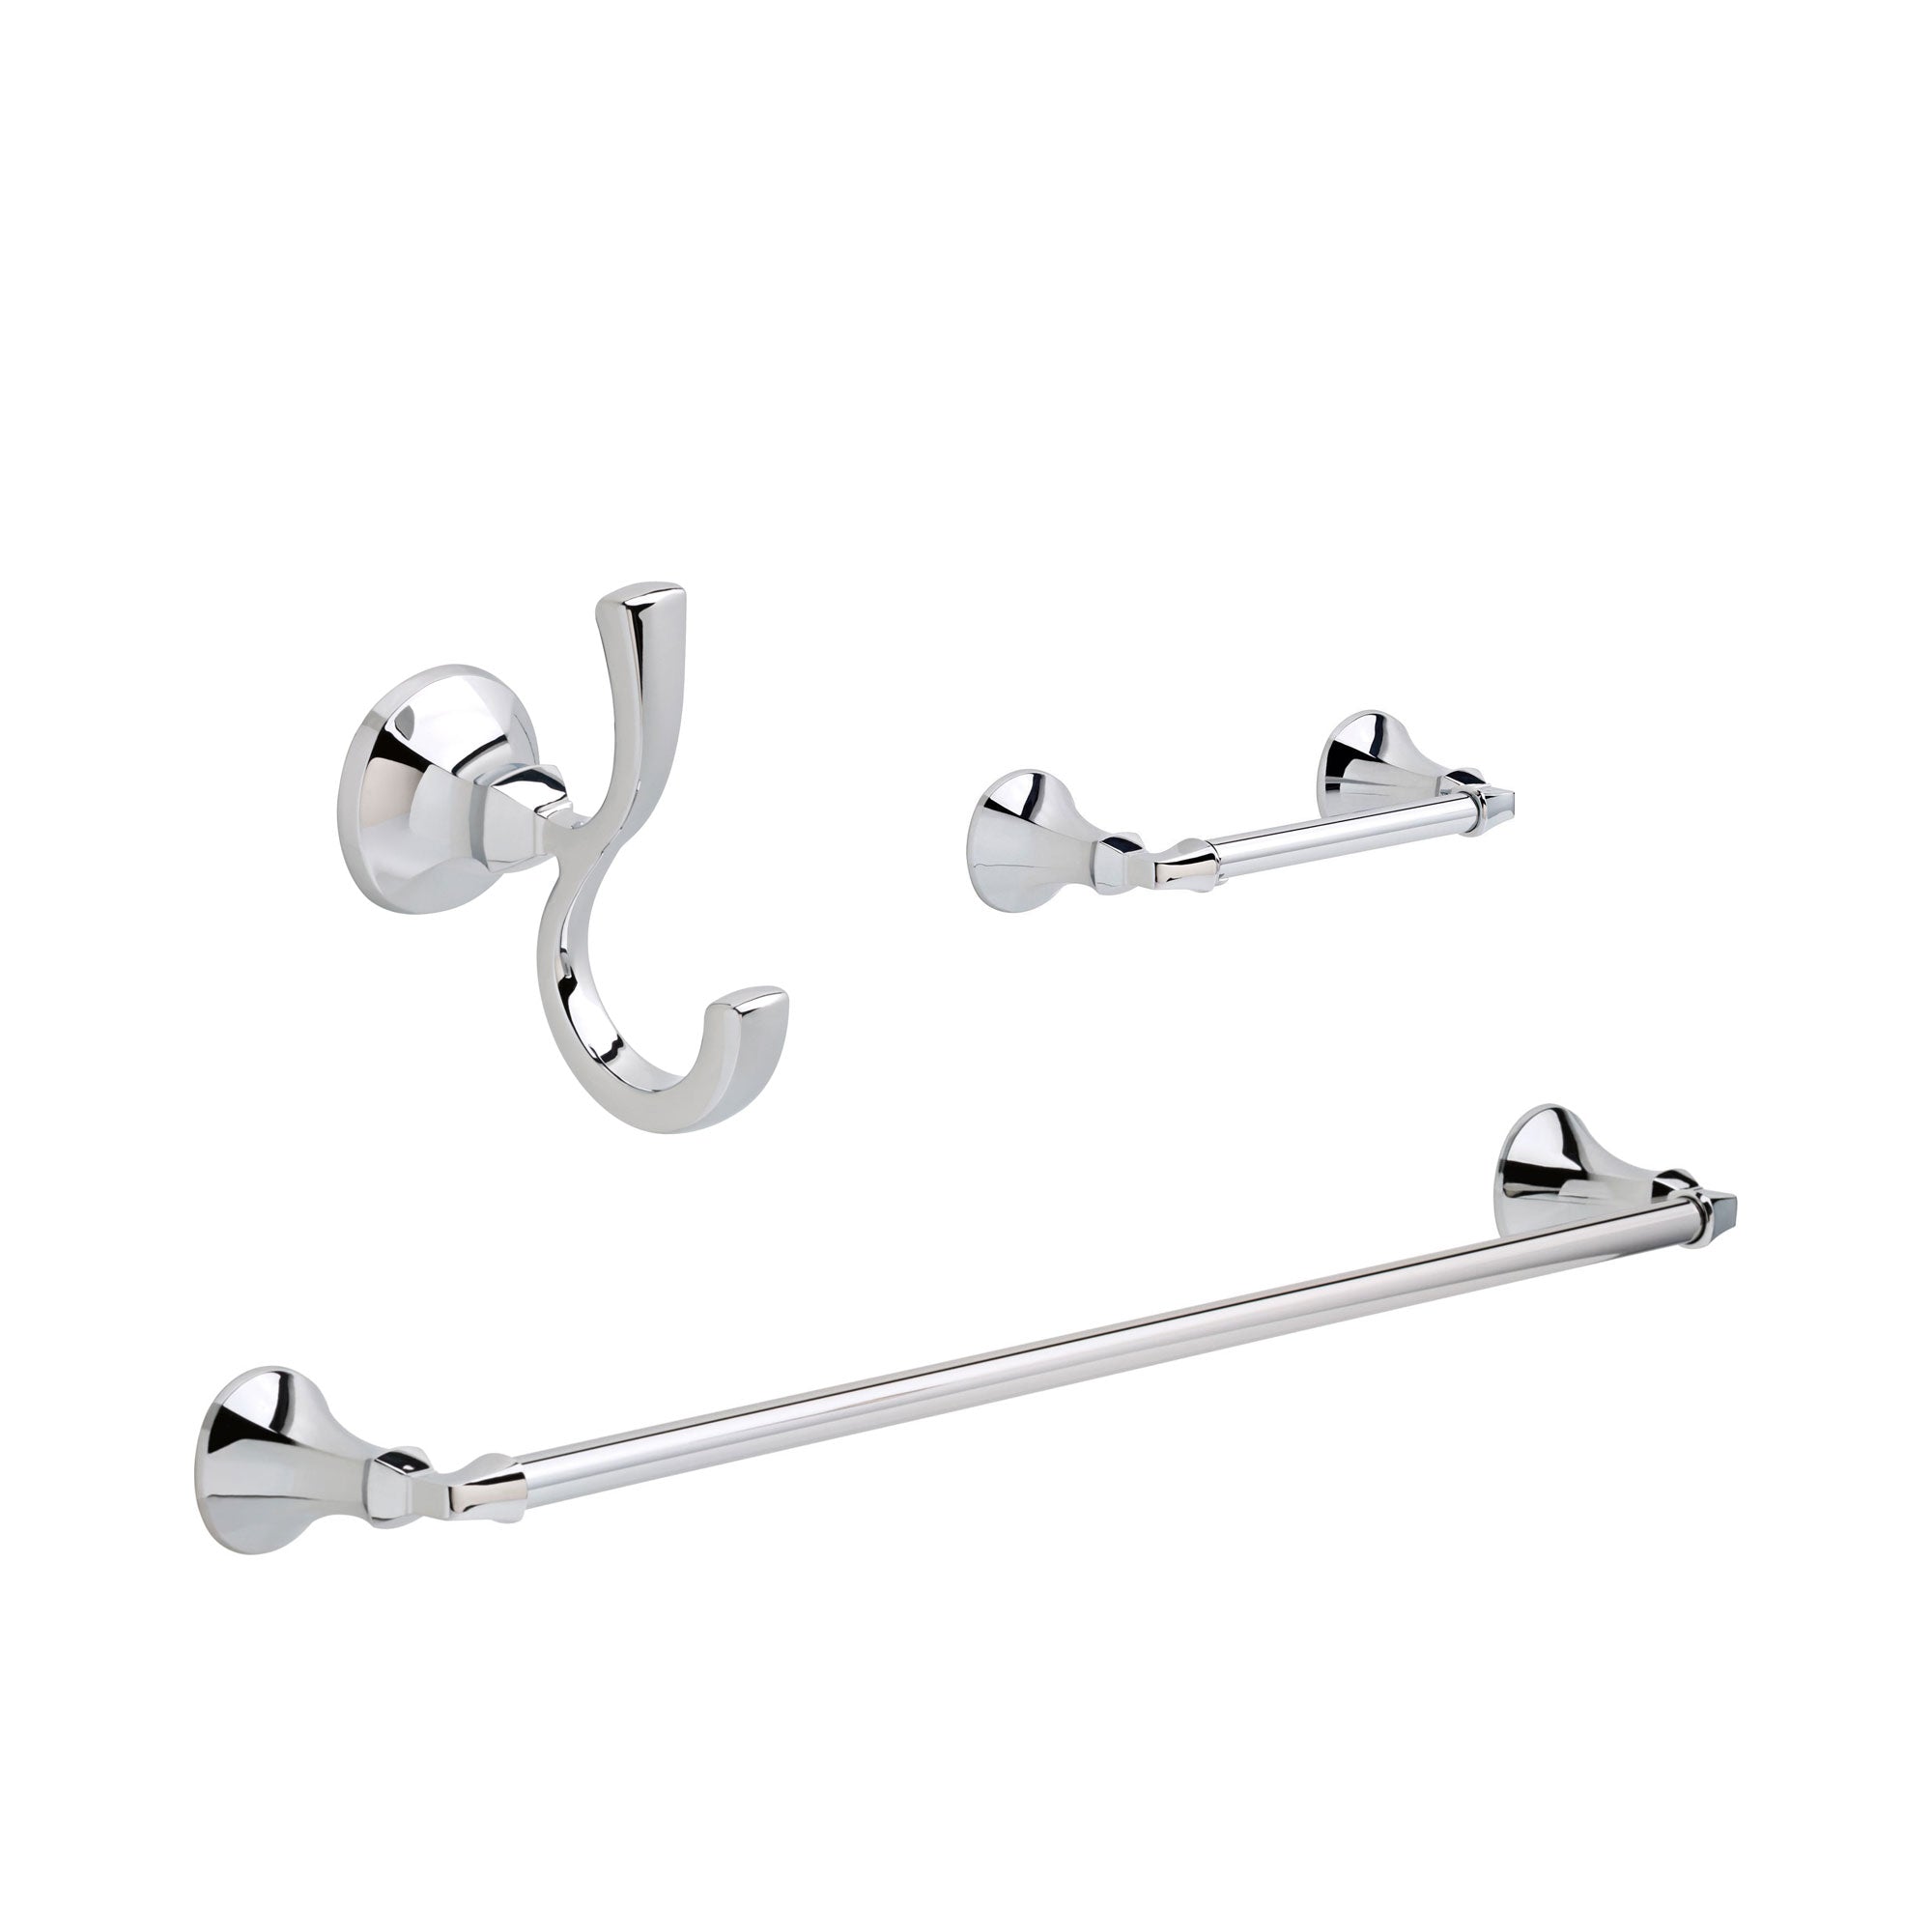 Bathroom Accessories - Paper Holders, Towel Bars, Rings, Robe Hooks Tagged  delta-ashlyn-collection 